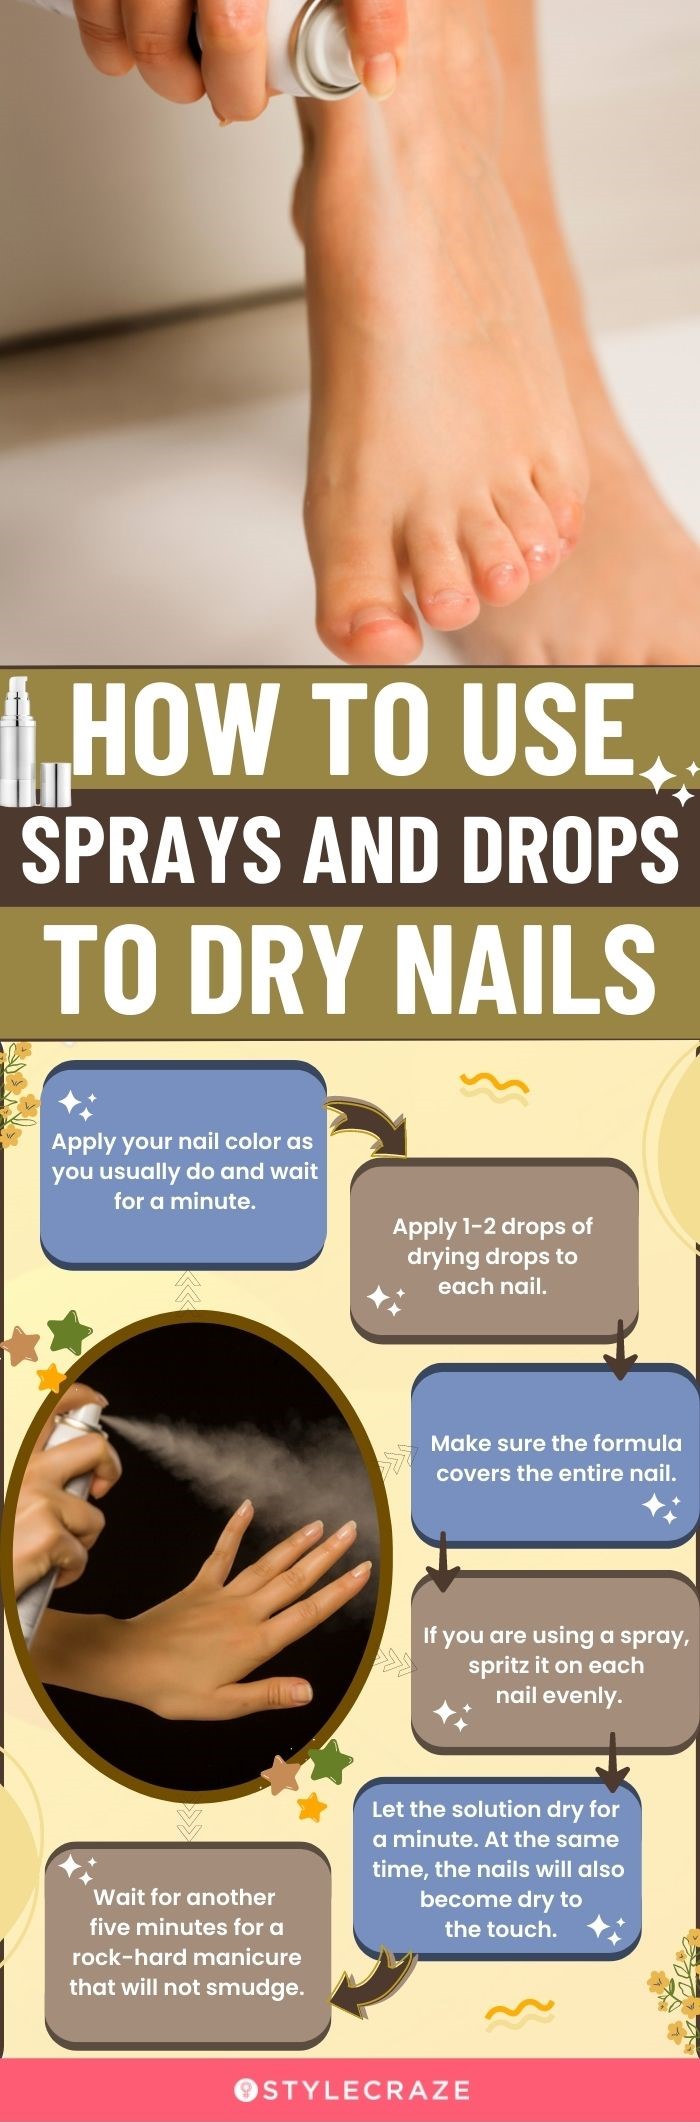 How To Use Sprays And Drops To Dry Nails (infographic)